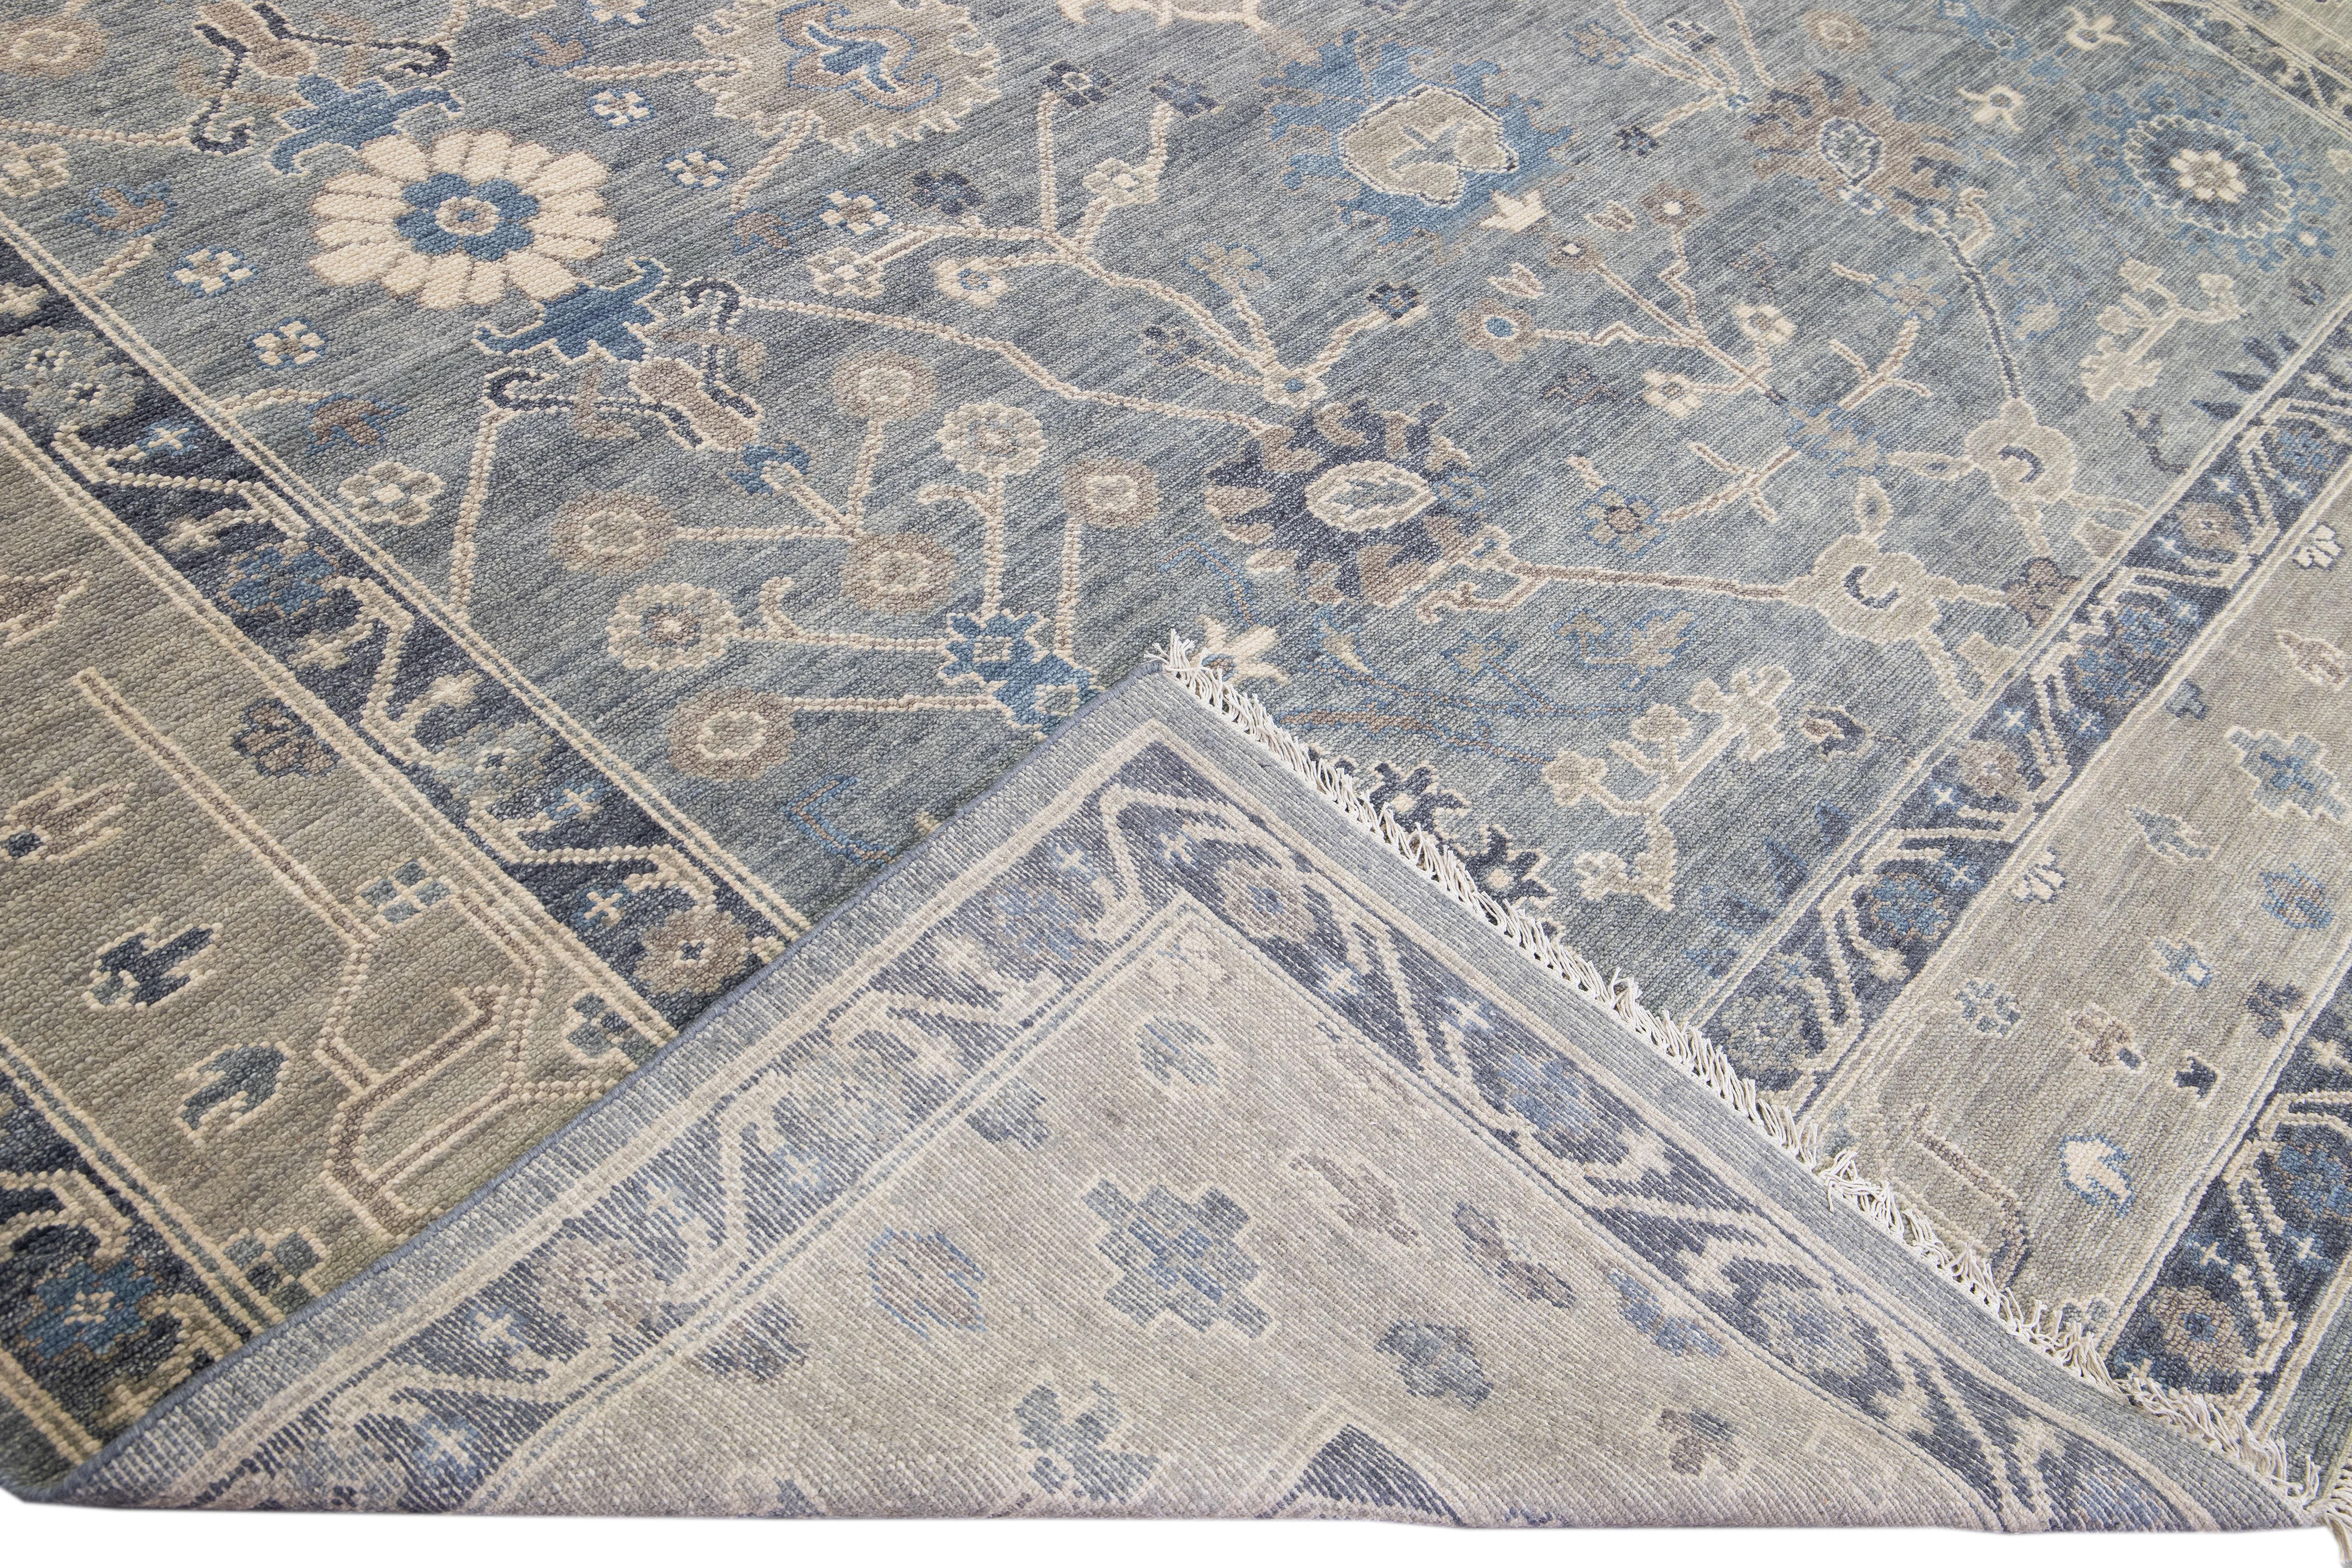 Beautiful modern Square Oushak hand-knotted wool rug with a gray field. This Oushak rug has a Tan-designed frame and blue accents all over a gorgeous floral design.

This rug measures 11' x 11'.

Our rugs are professional cleaning before